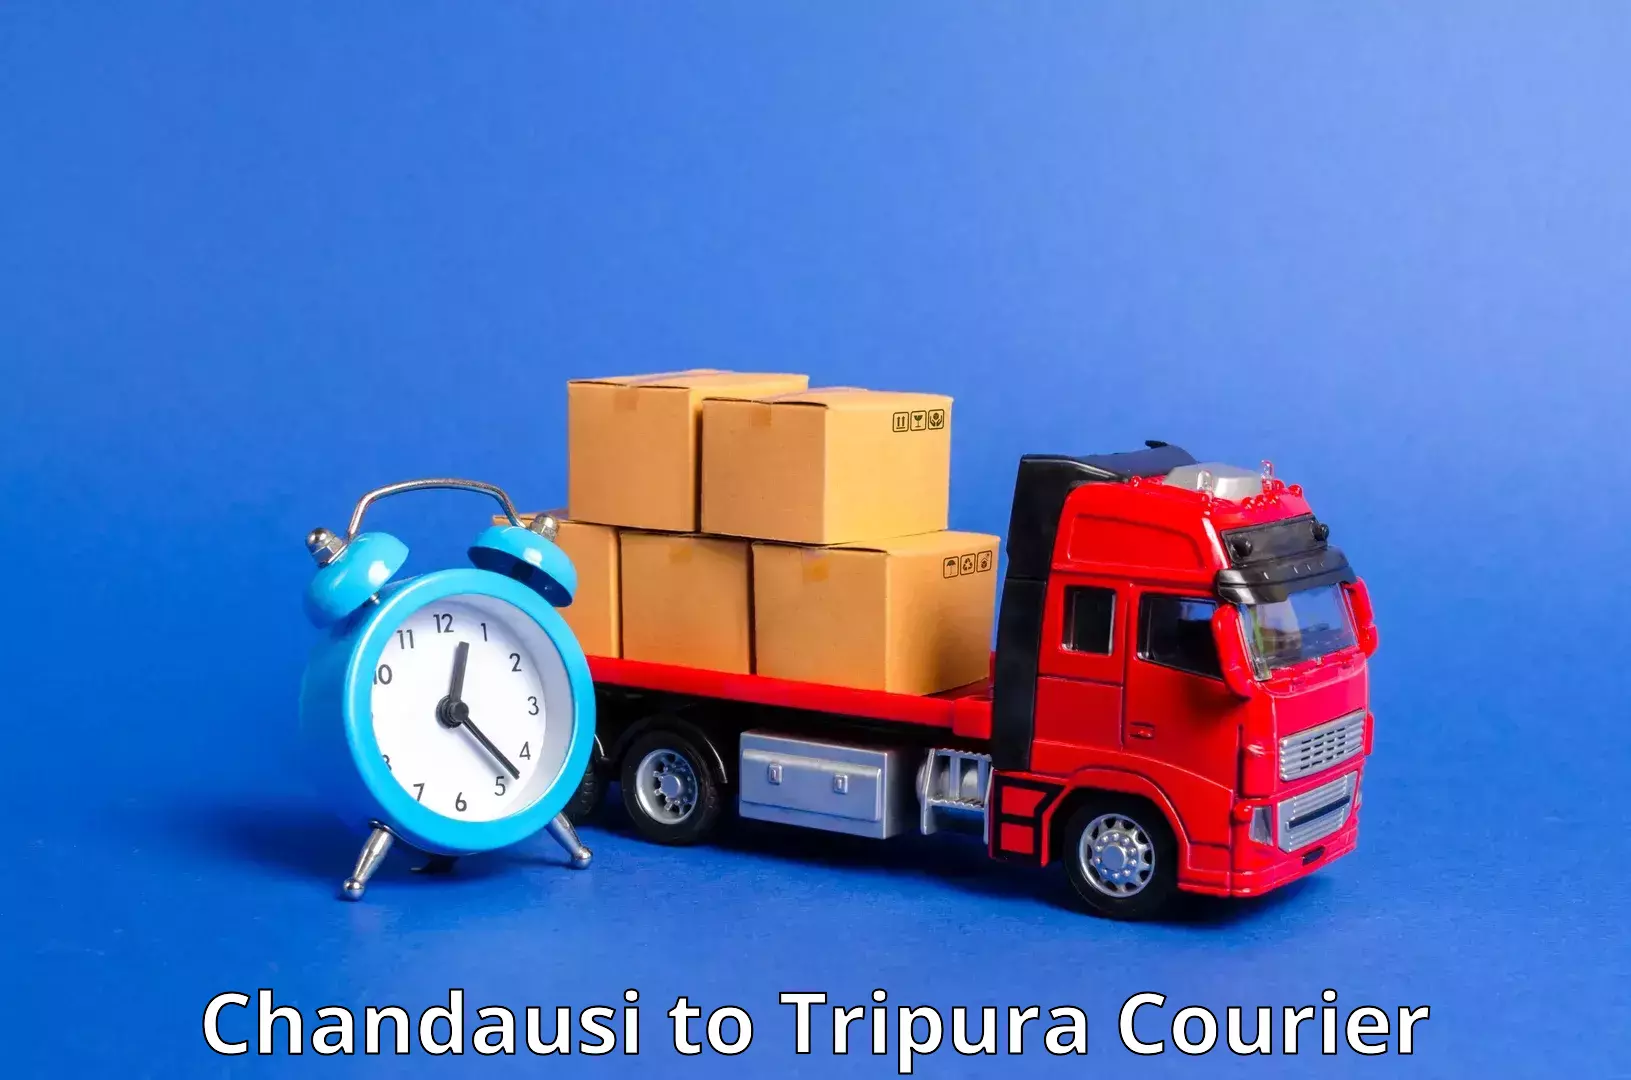 Multi-package shipping in Chandausi to Udaipur Tripura